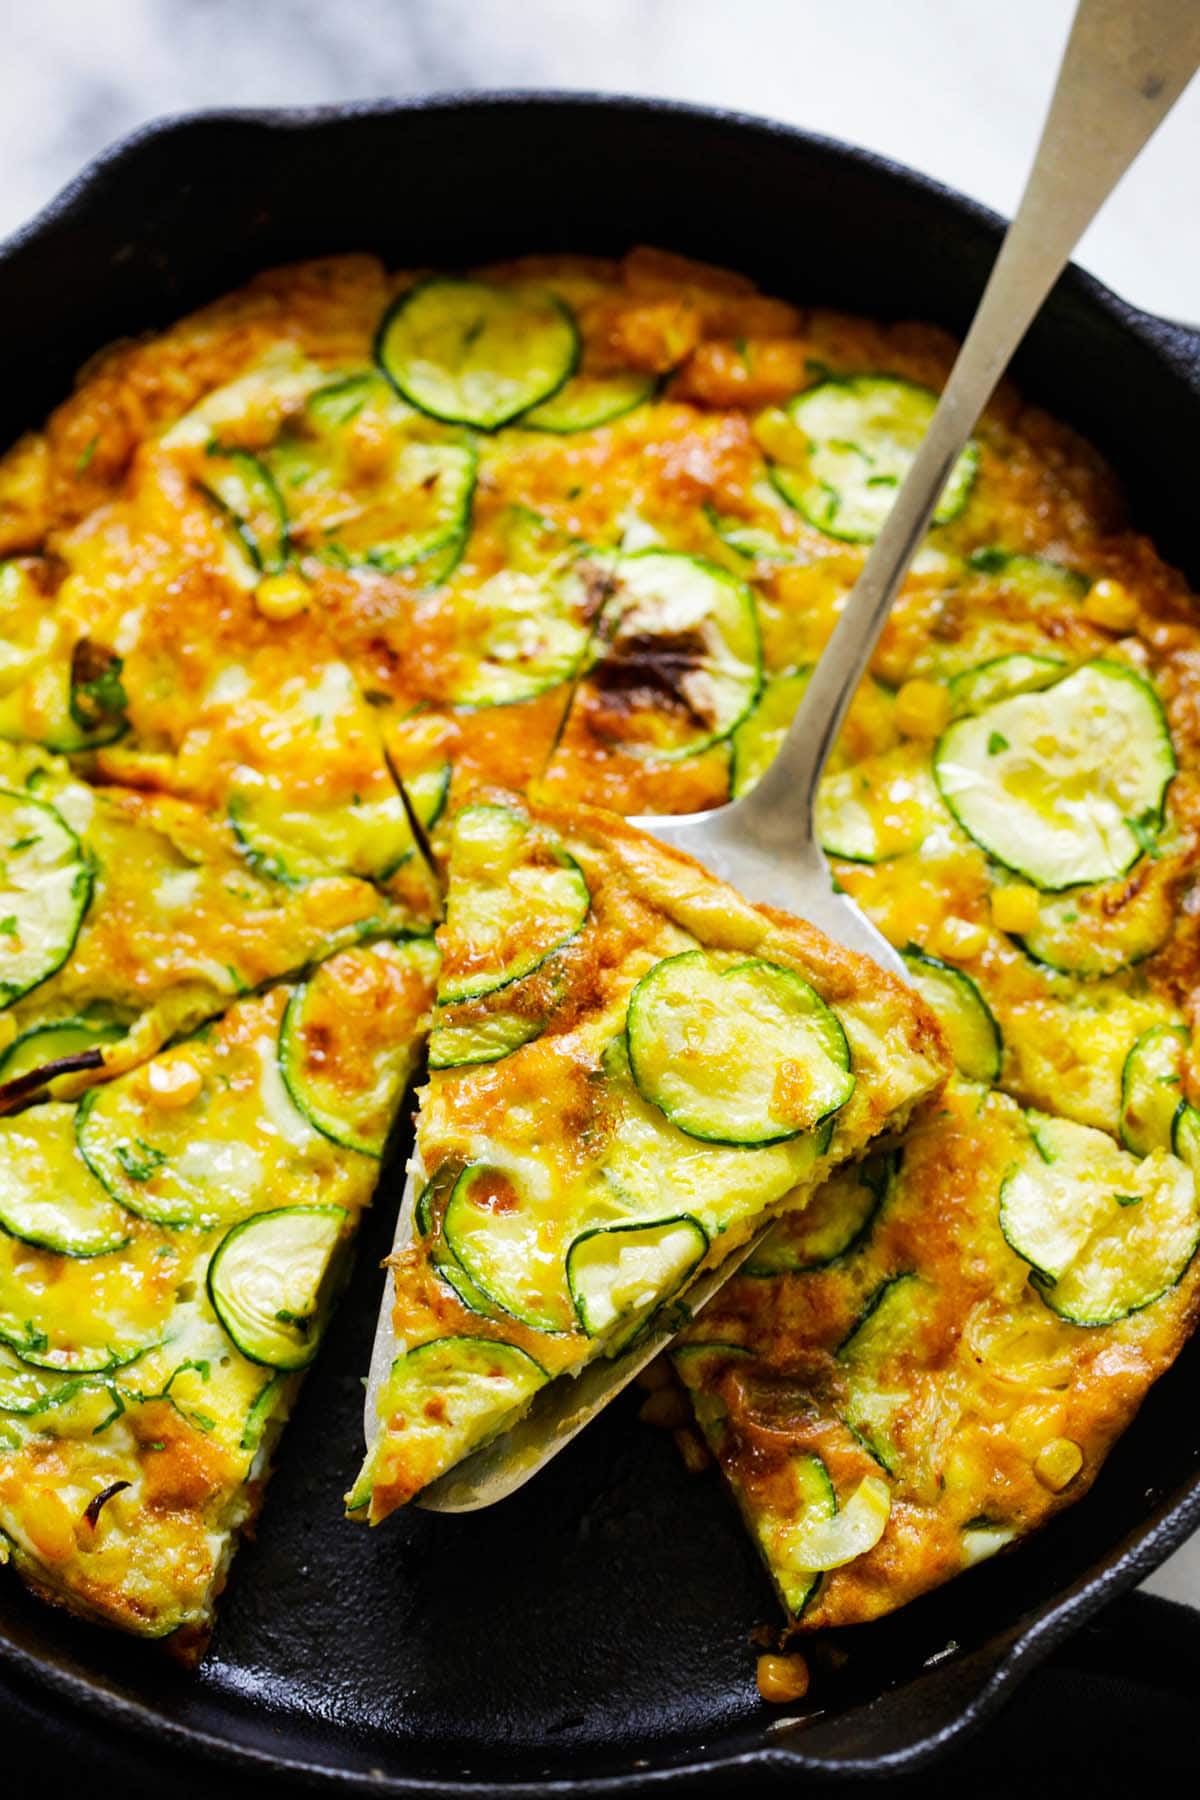 Delicious Italian omelette pancake or egg frittata with zucchini and corn.